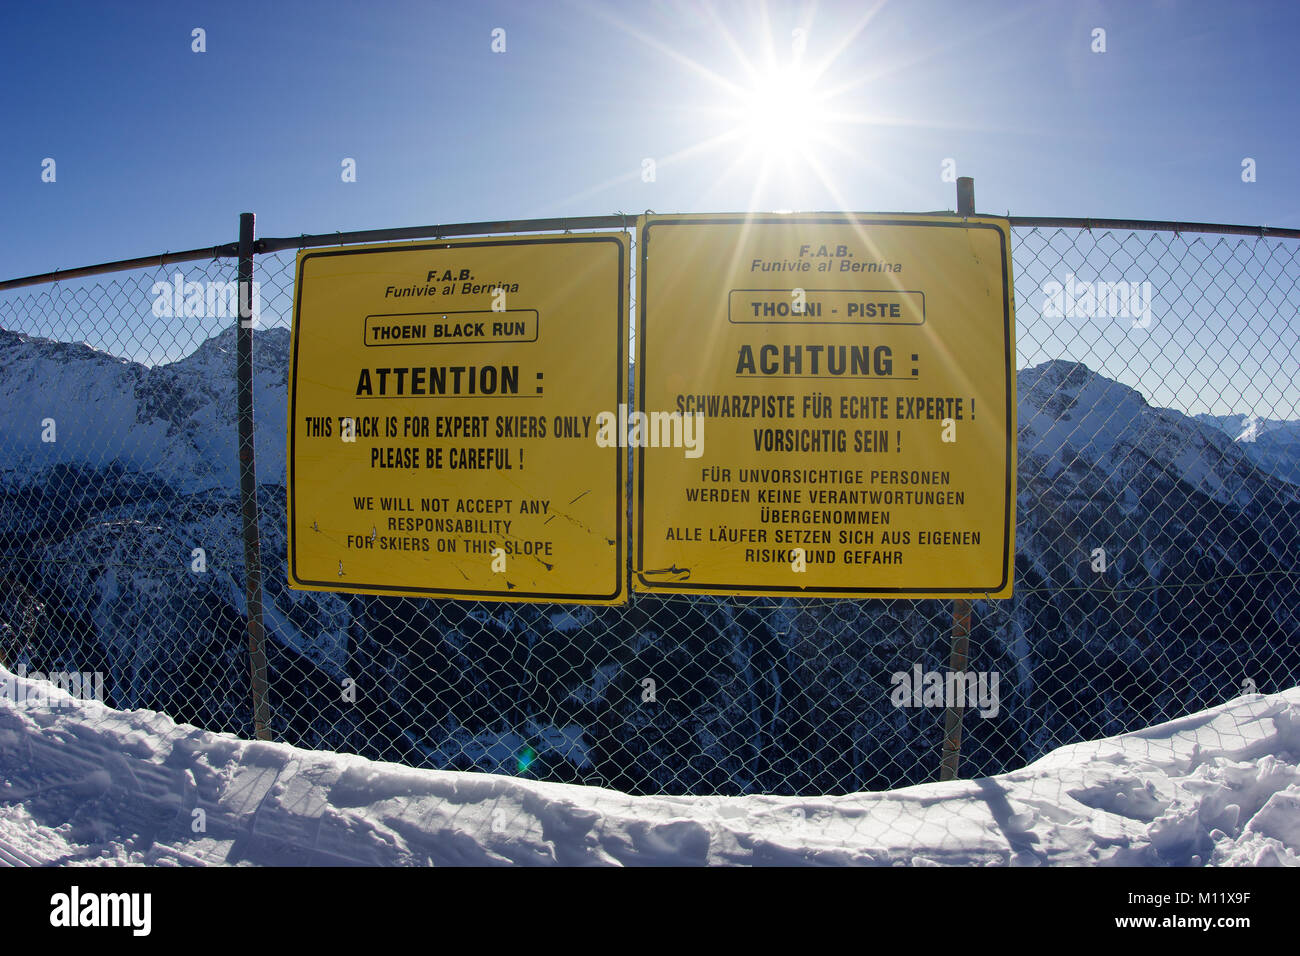 attention notice board/sign on ski piste 'only for expert skiers' black piste Stock Photo